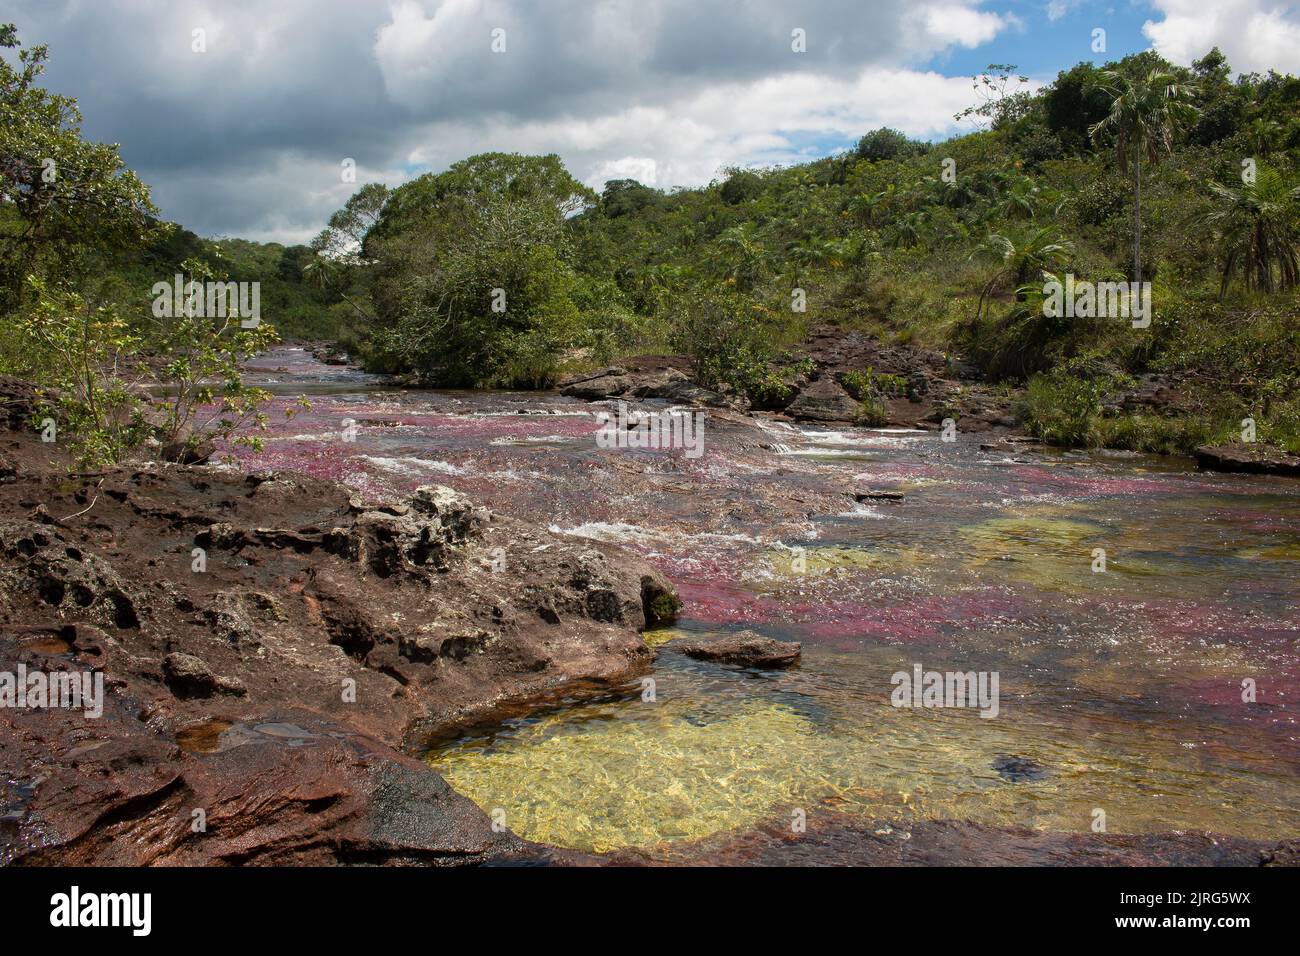 The Cano Cristales river, known as the Rainbow River, in the Serrania de La Macarena National Park in the Meta Department of Colombia Stock Photo